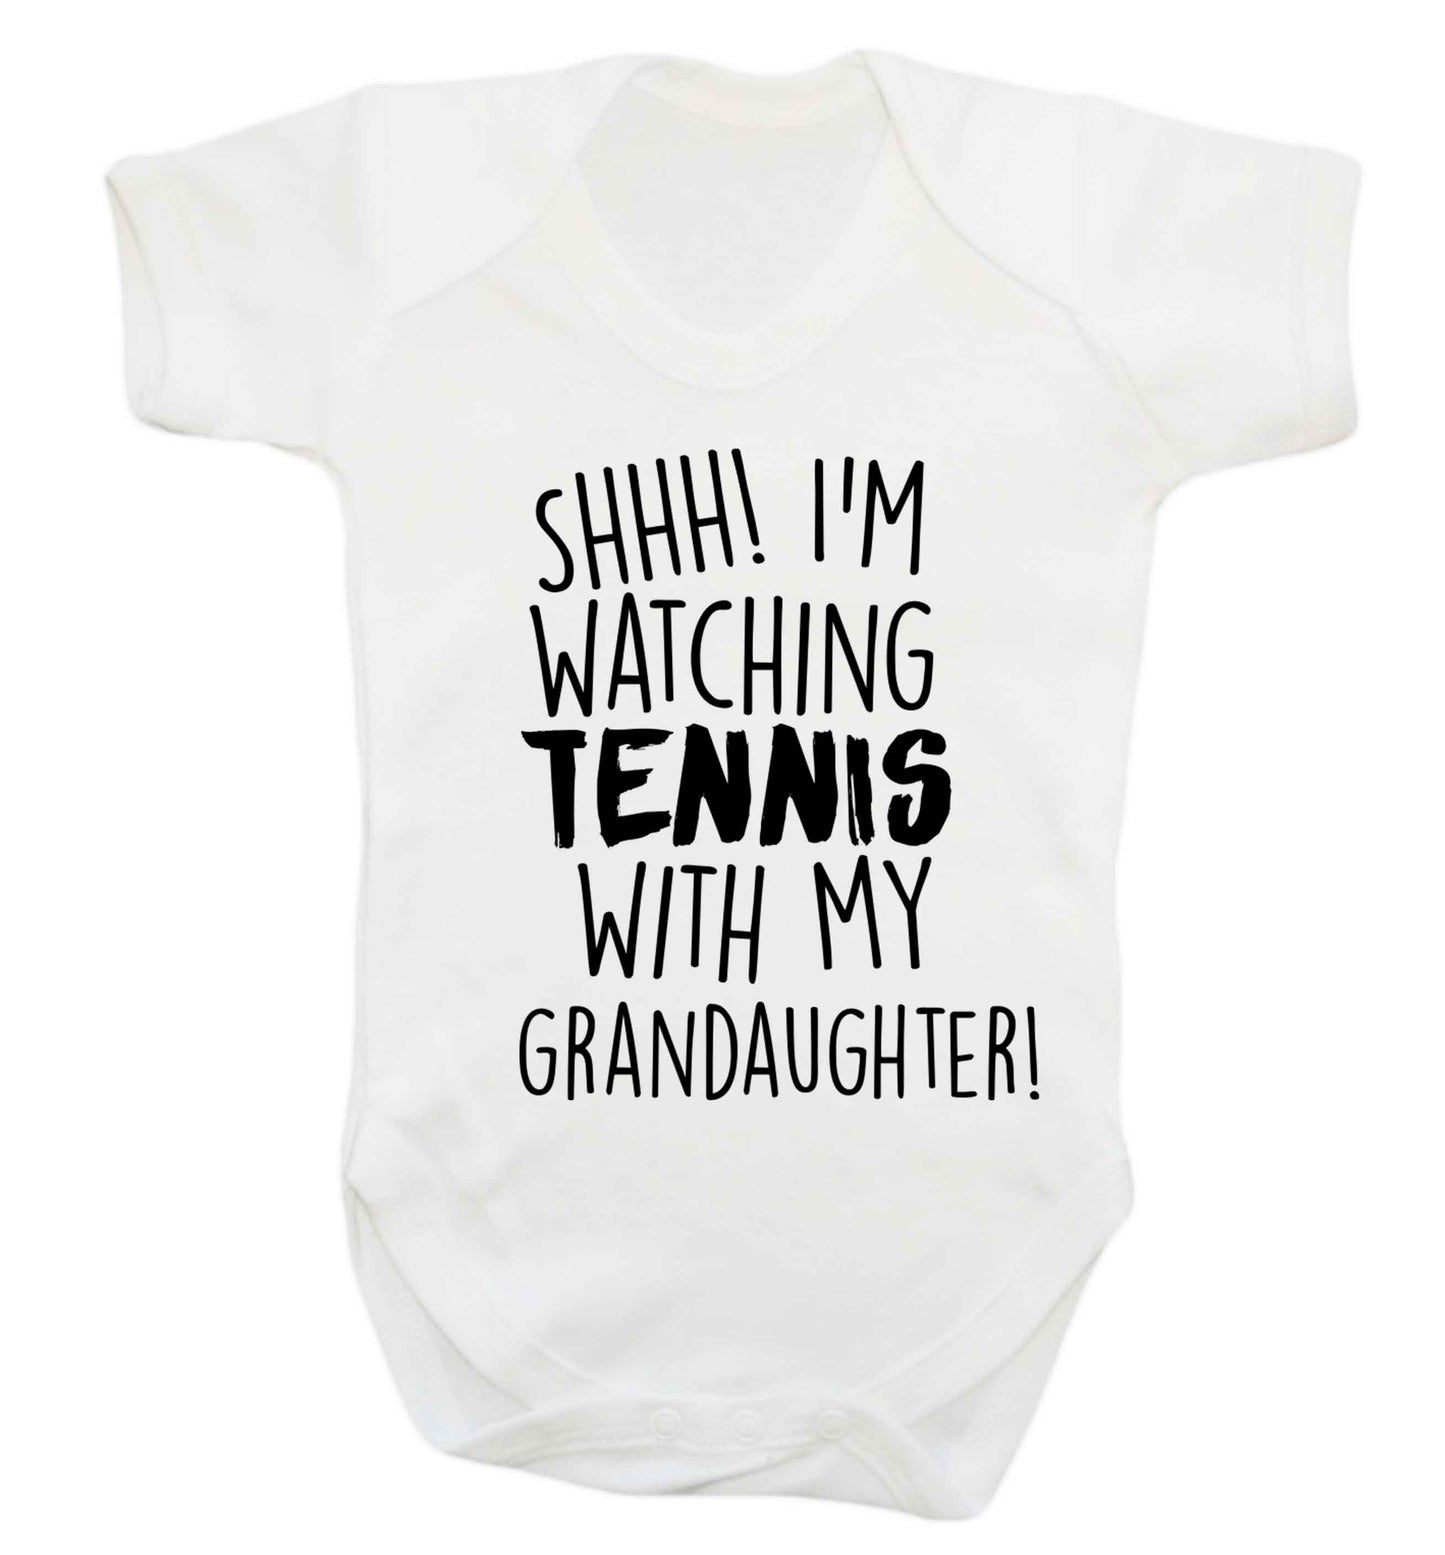 Shh! I'm watching tennis with my granddaughter! Baby Vest white 18-24 months